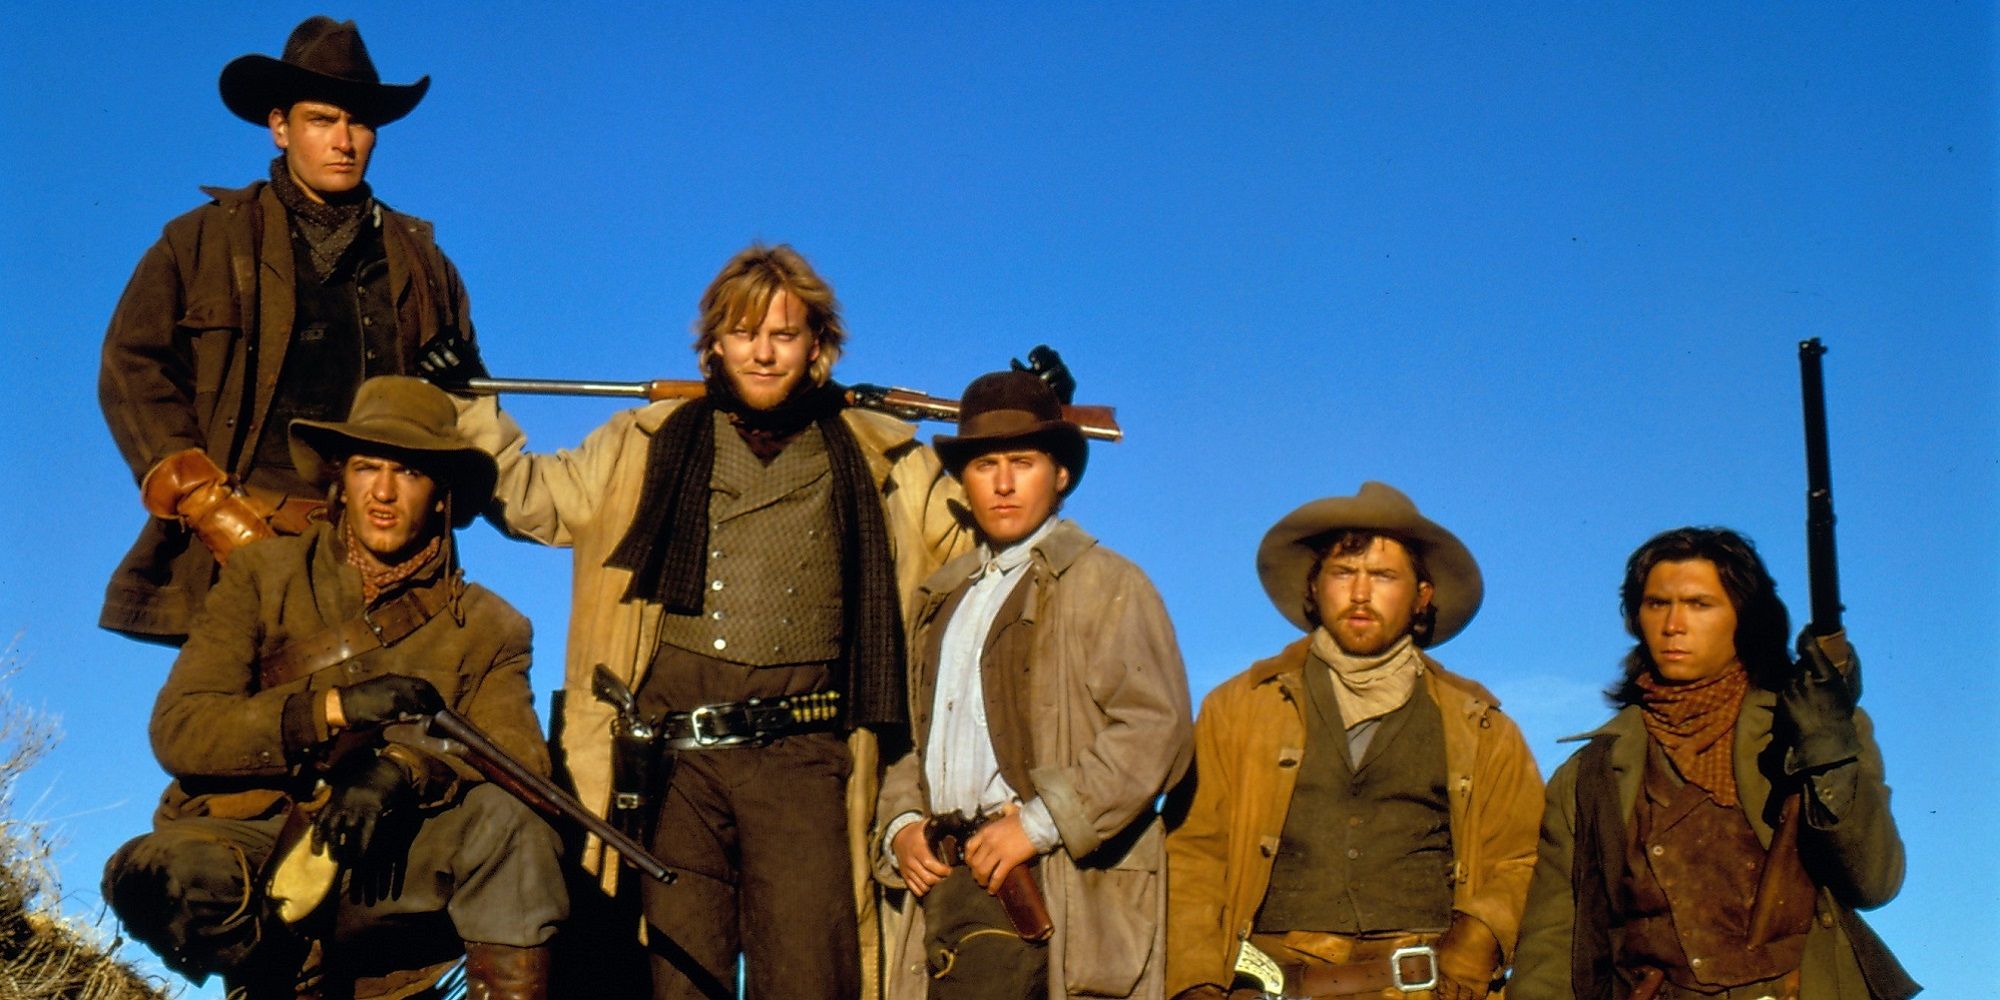 did tom cruise have a cameo in young guns